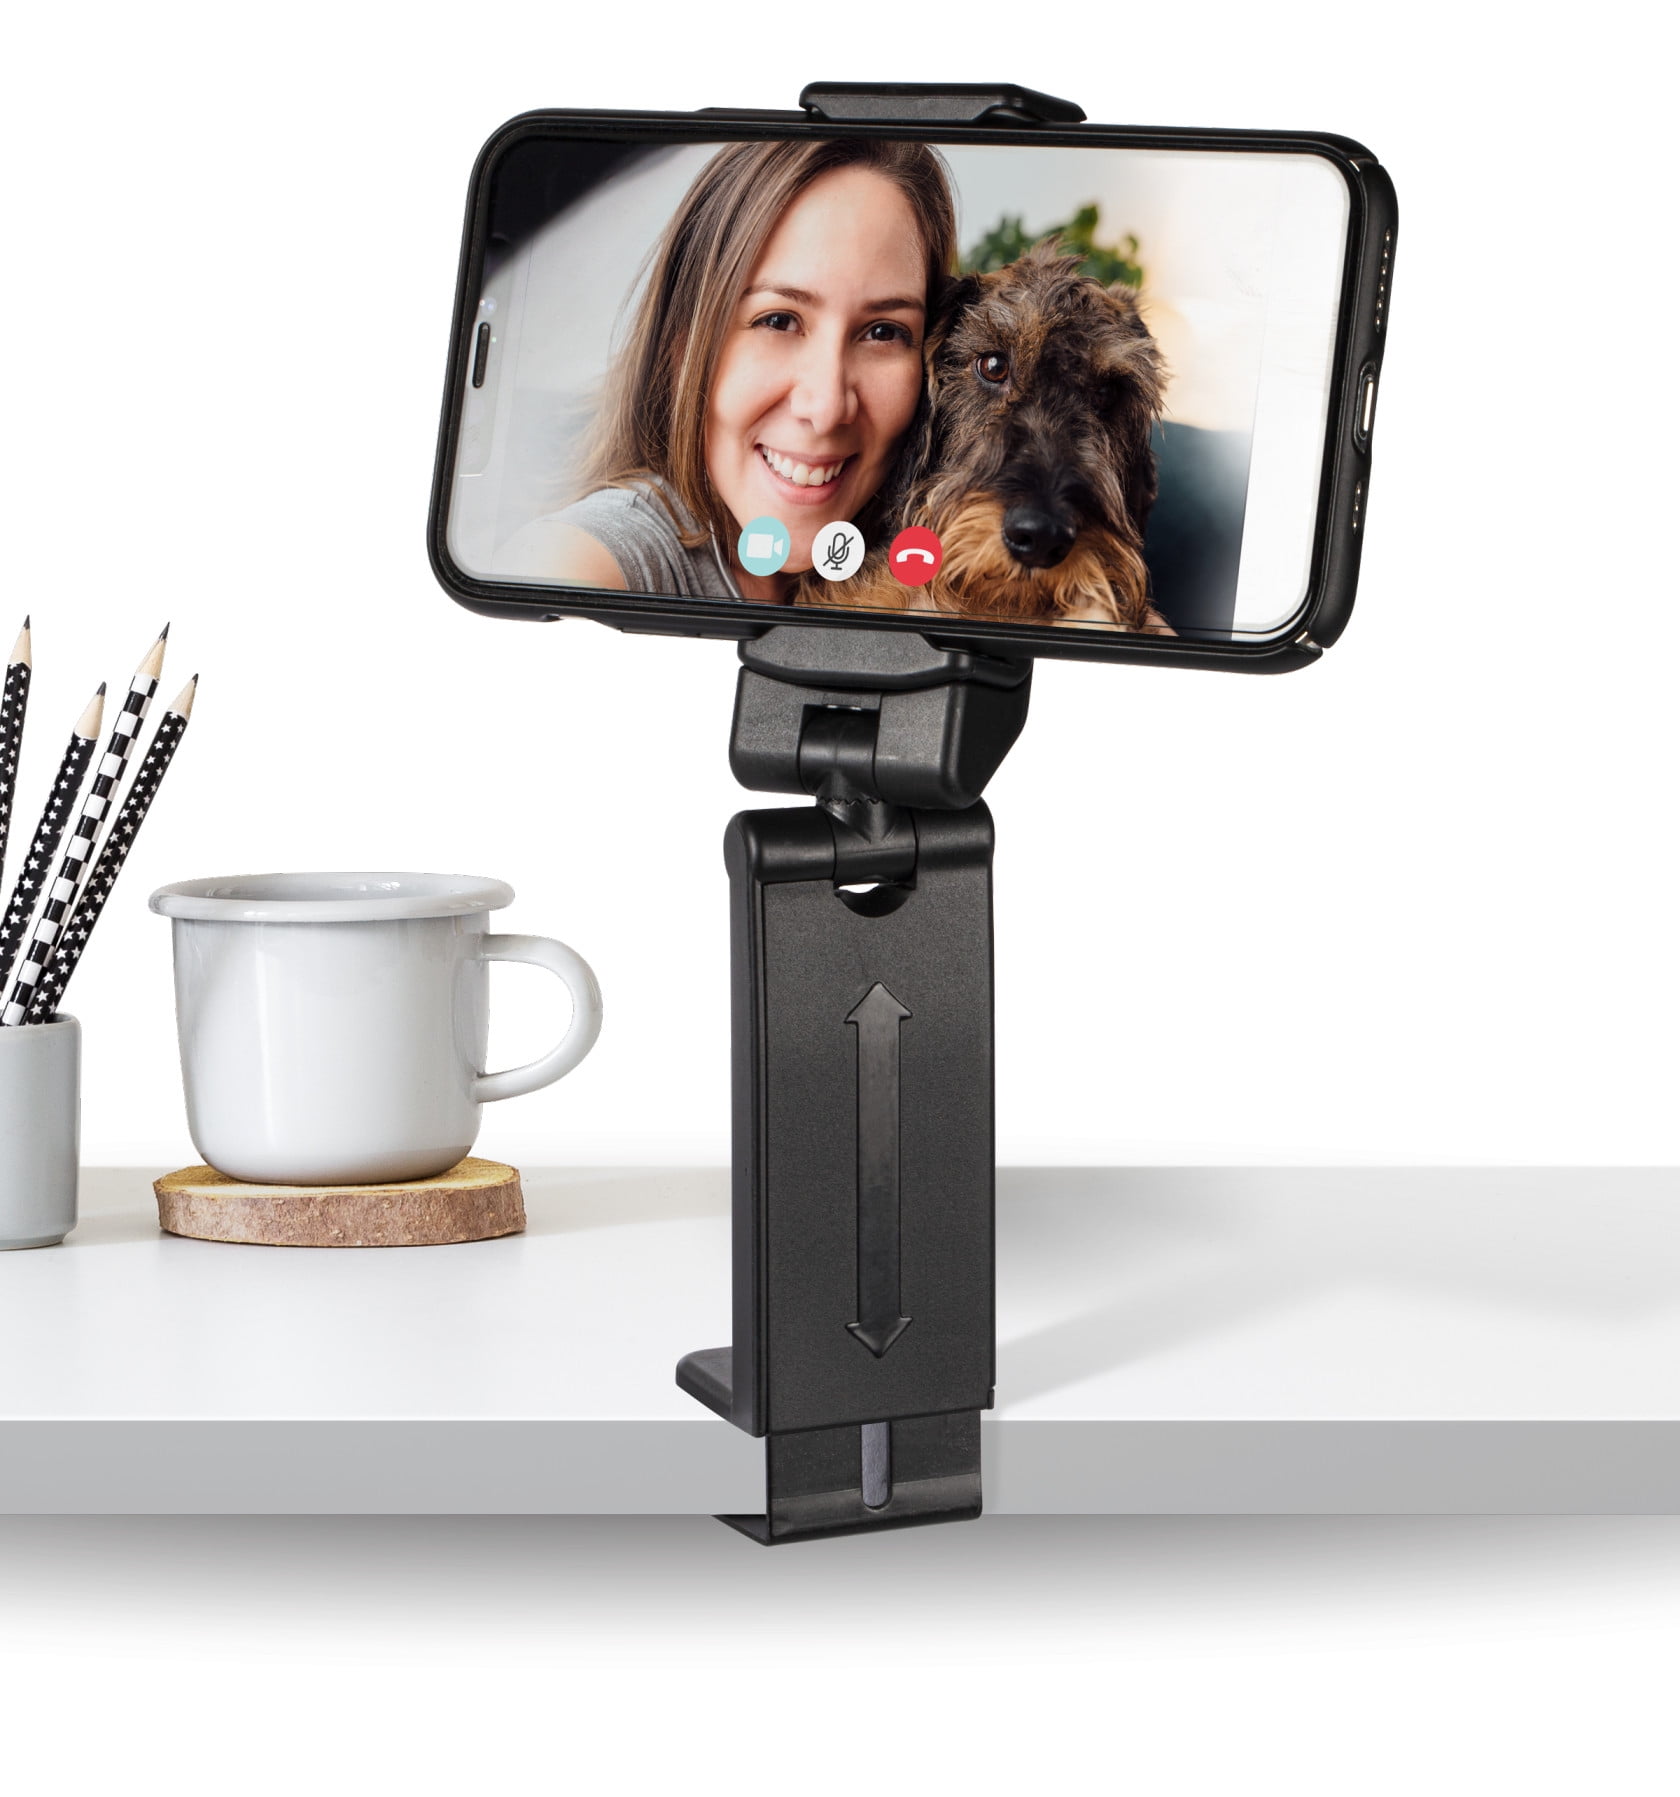 IJOY Clip 360 - Compact Phone Holder - Black